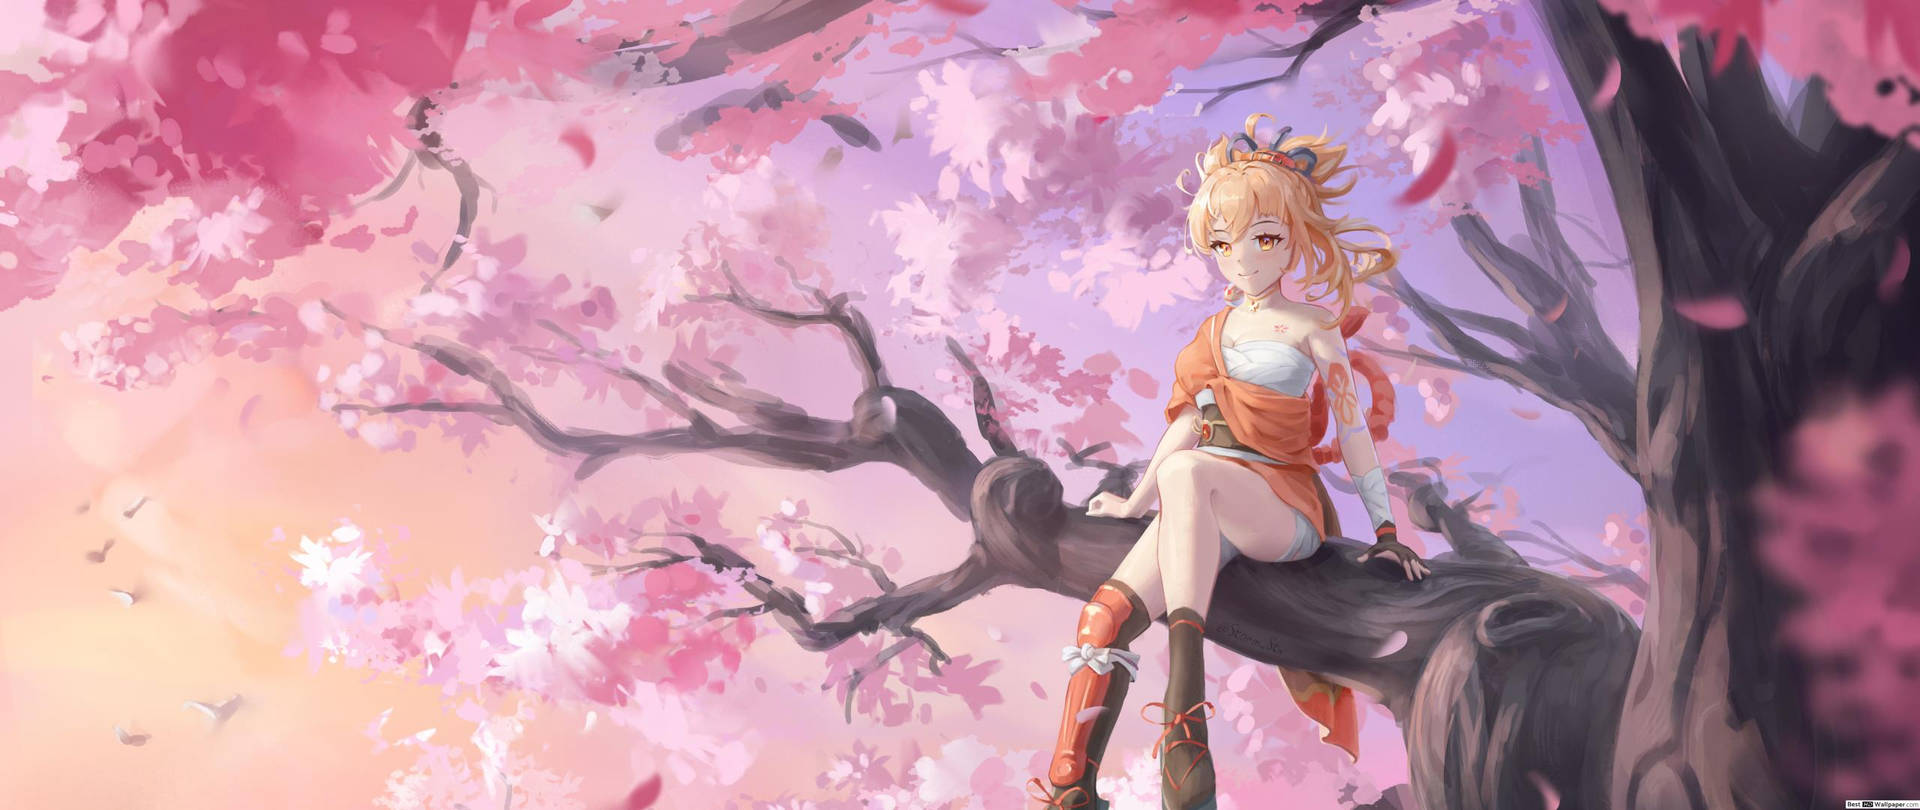 Cool Anime Girl On Cherry Blossom Picture